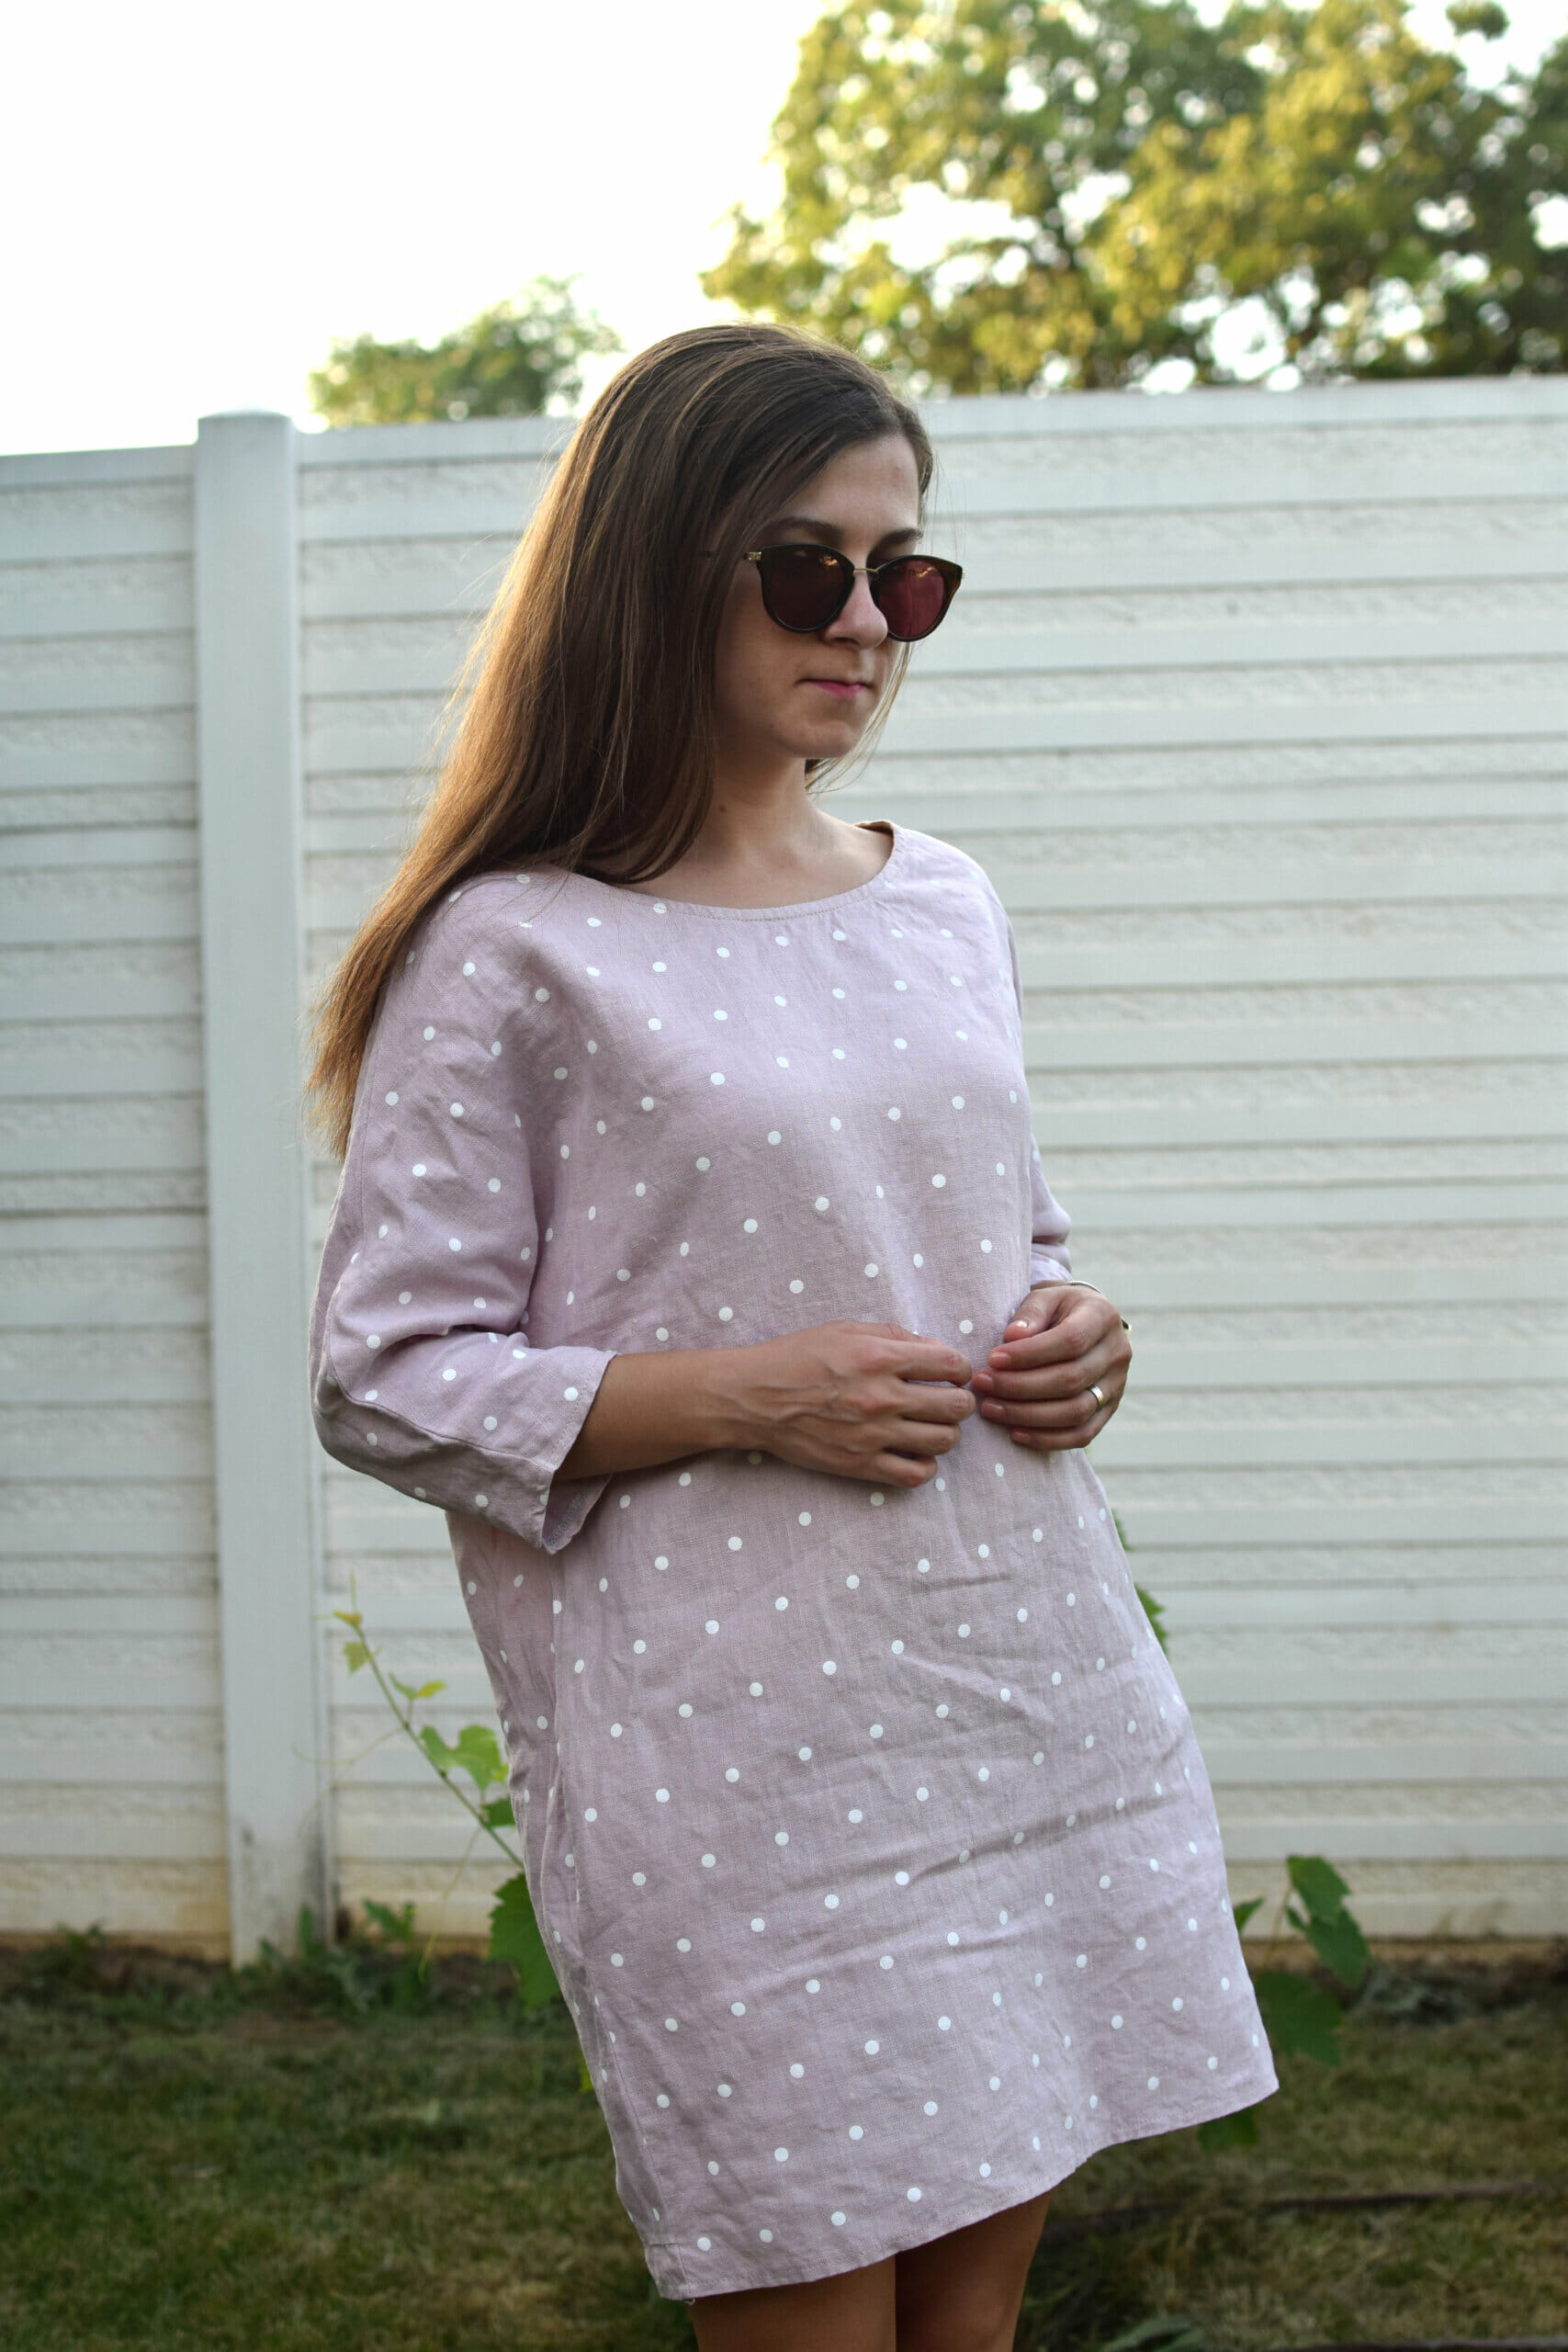 DIY tunic linen dress tutorial - I Can Sew This